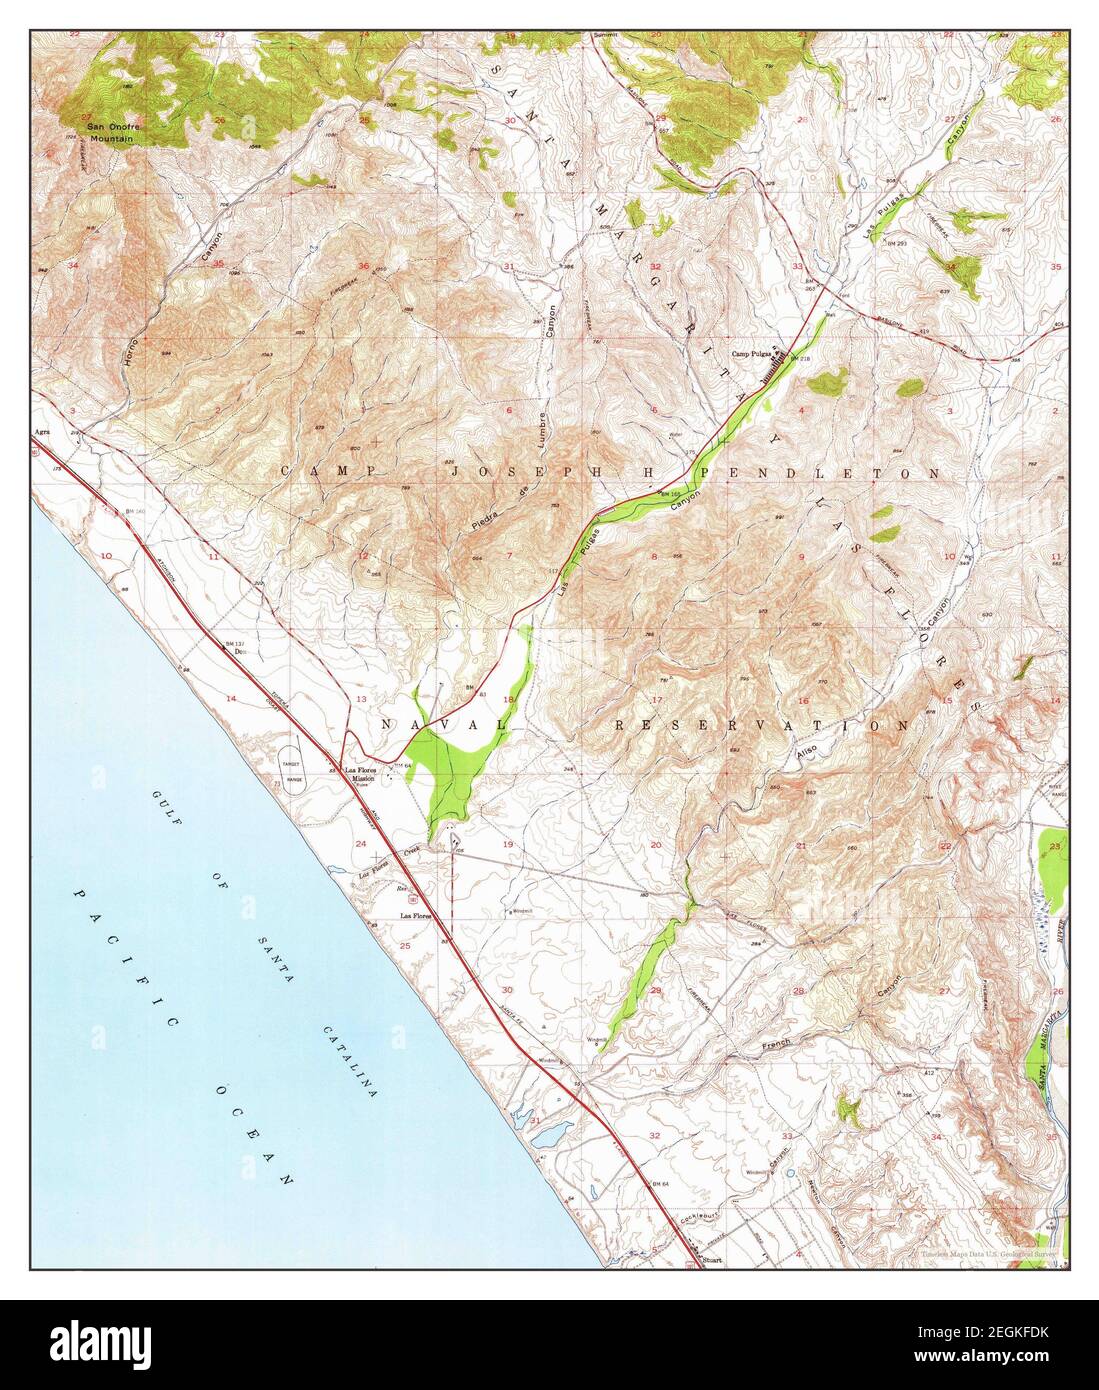 Las Pulgas Canyon, California, map 1948, 1:24000, United States of America by Timeless Maps, data U.S. Geological Survey Stock Photo